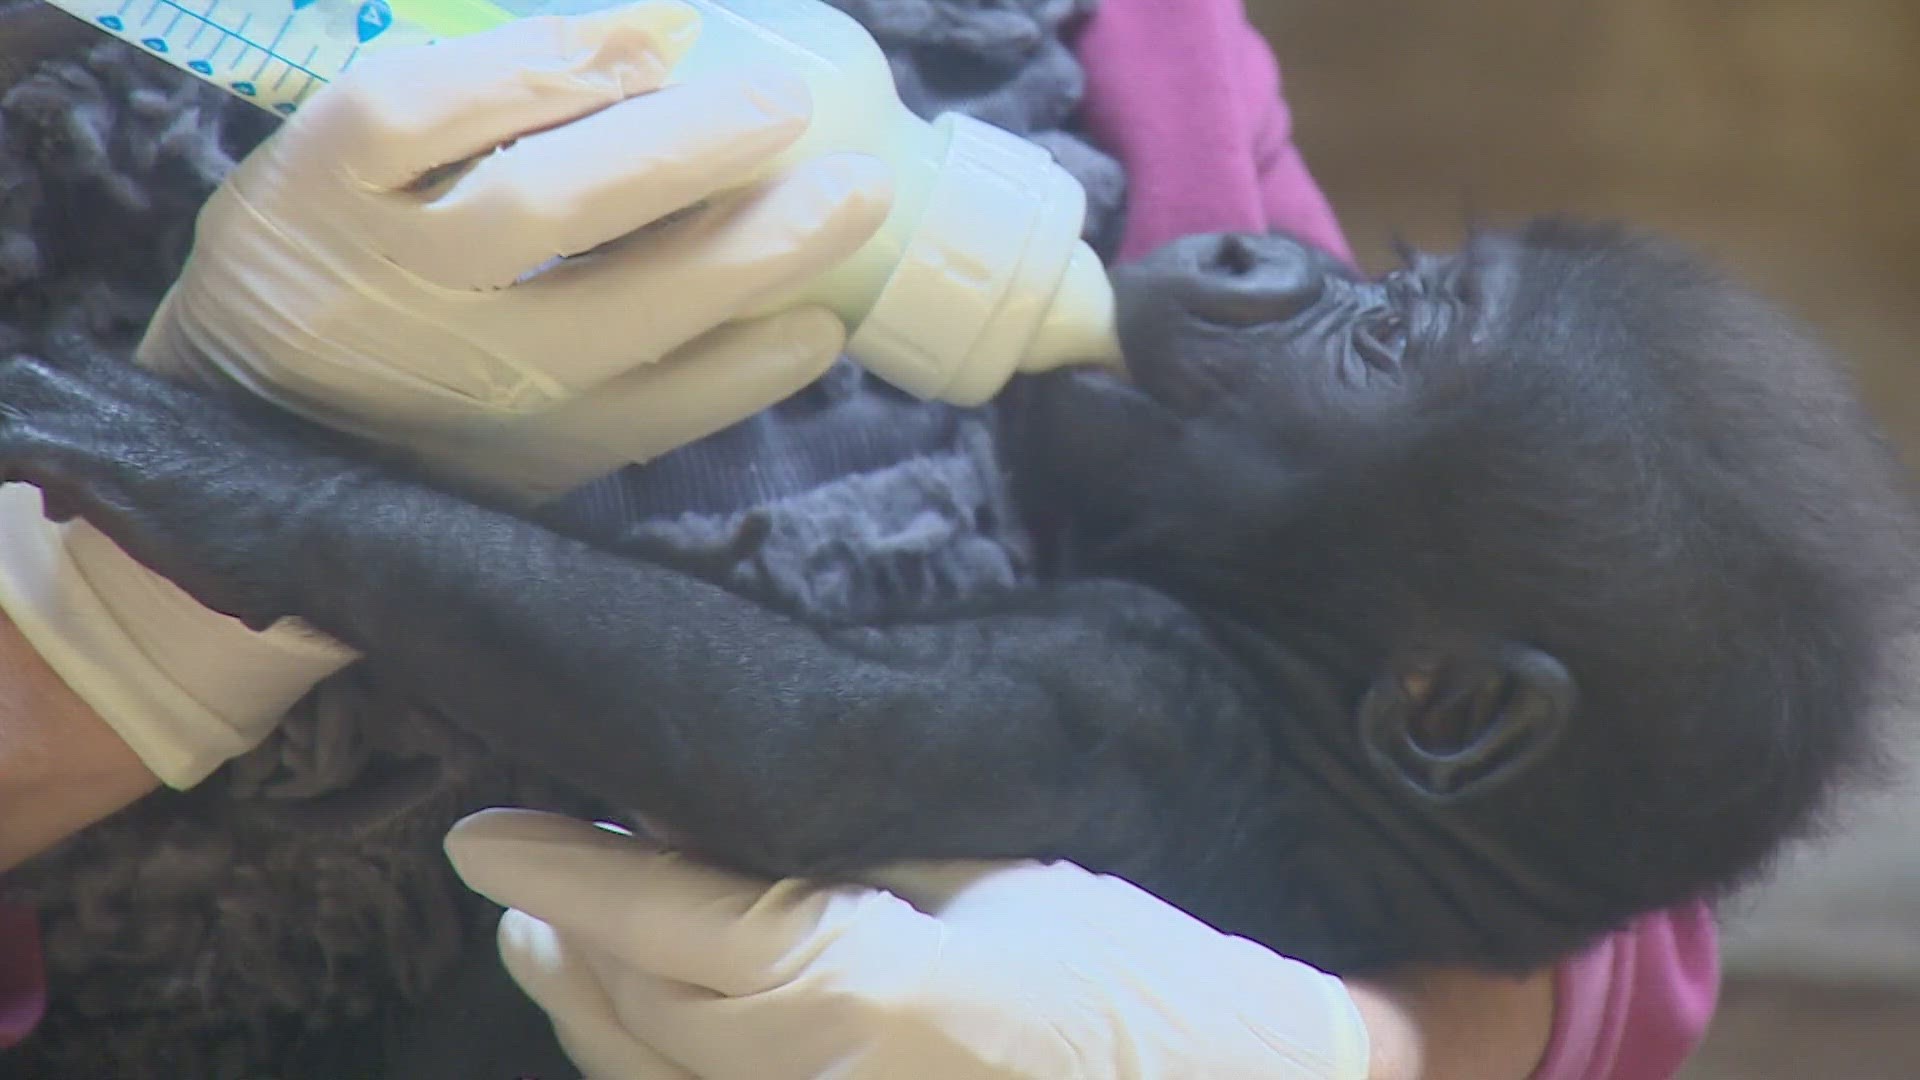 After her birth, zoo officials tried reuniting Jameela and Sekani numerous times, but unfortunately, the gorilla showed little interest in caring for her baby.